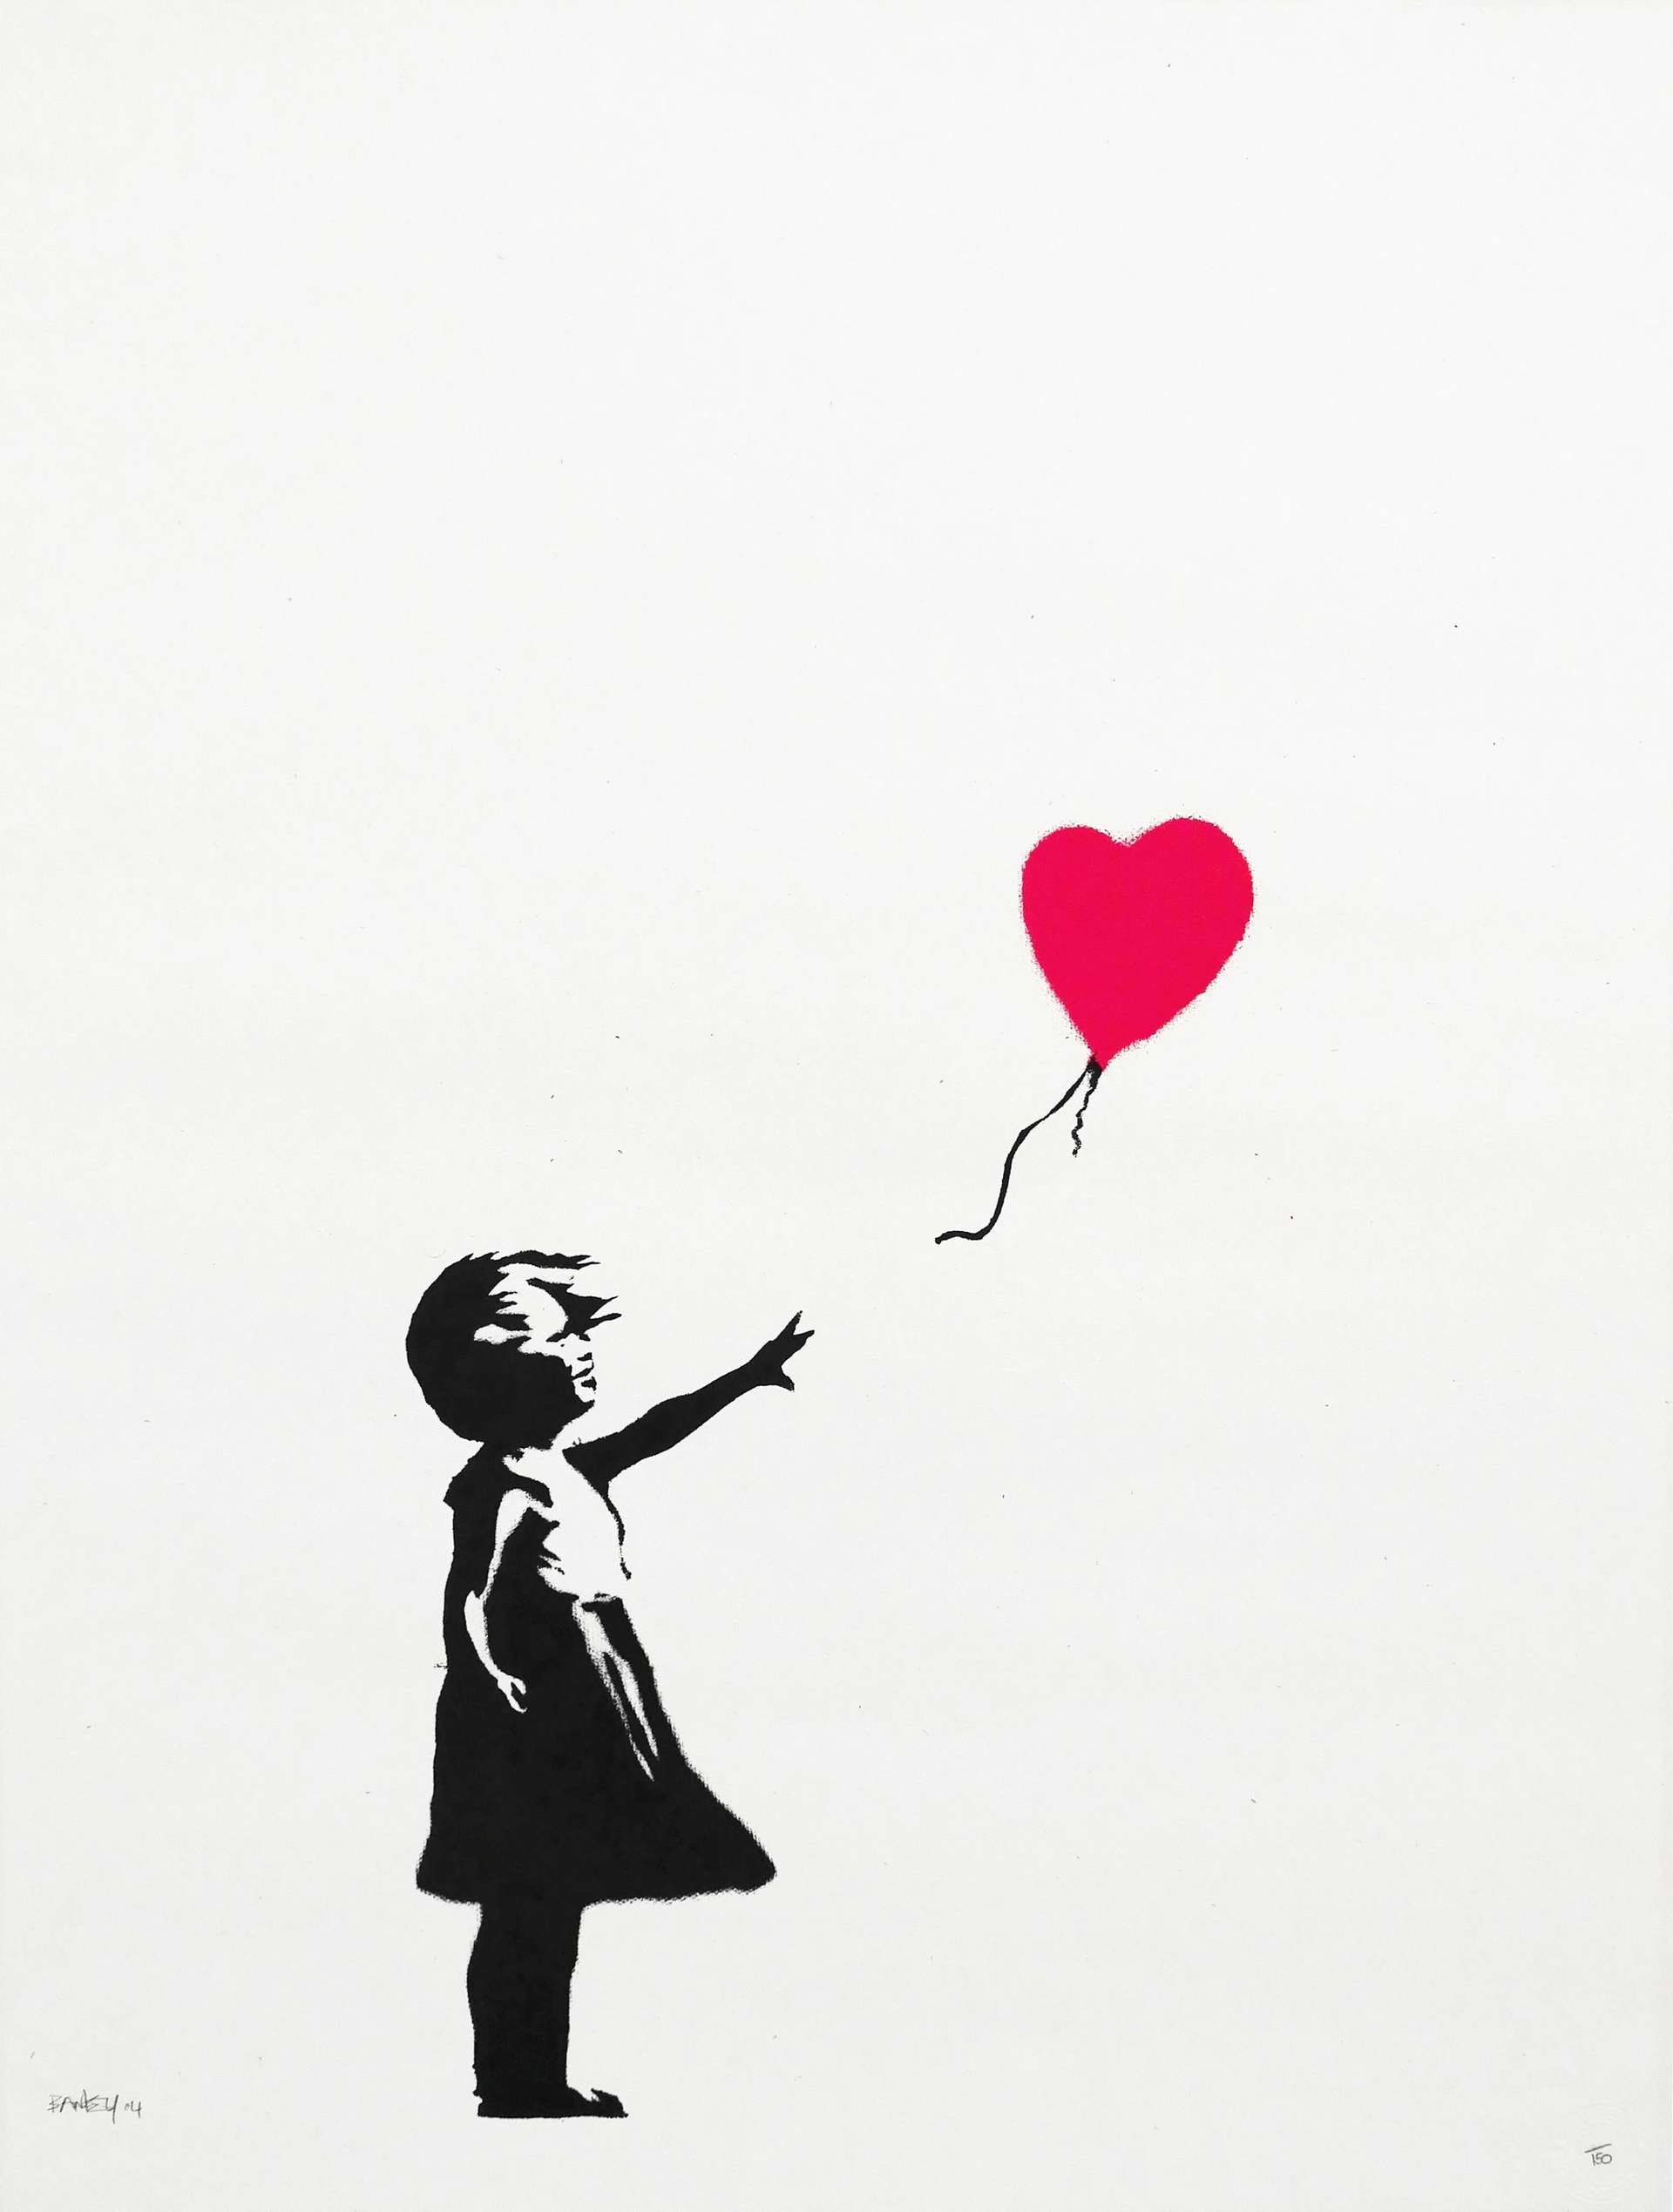 The work depicts a girl reaching for a red heart-shaped balloon in Banksy’s graffiti stencil style.